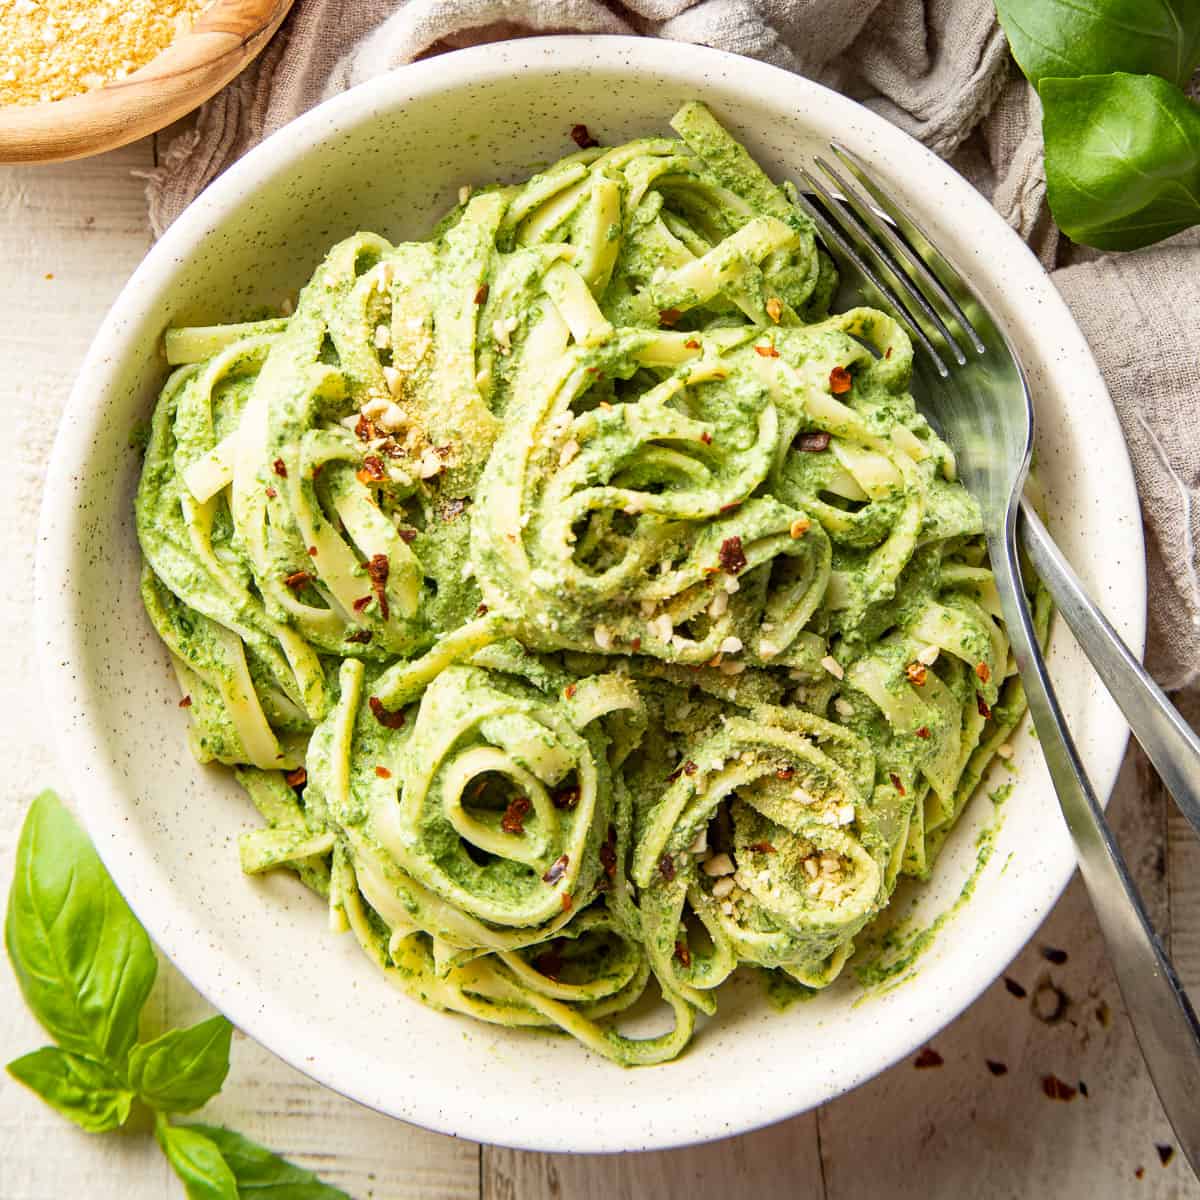 Bowl of Vegan Spinach Pasta with a fork and spoon.